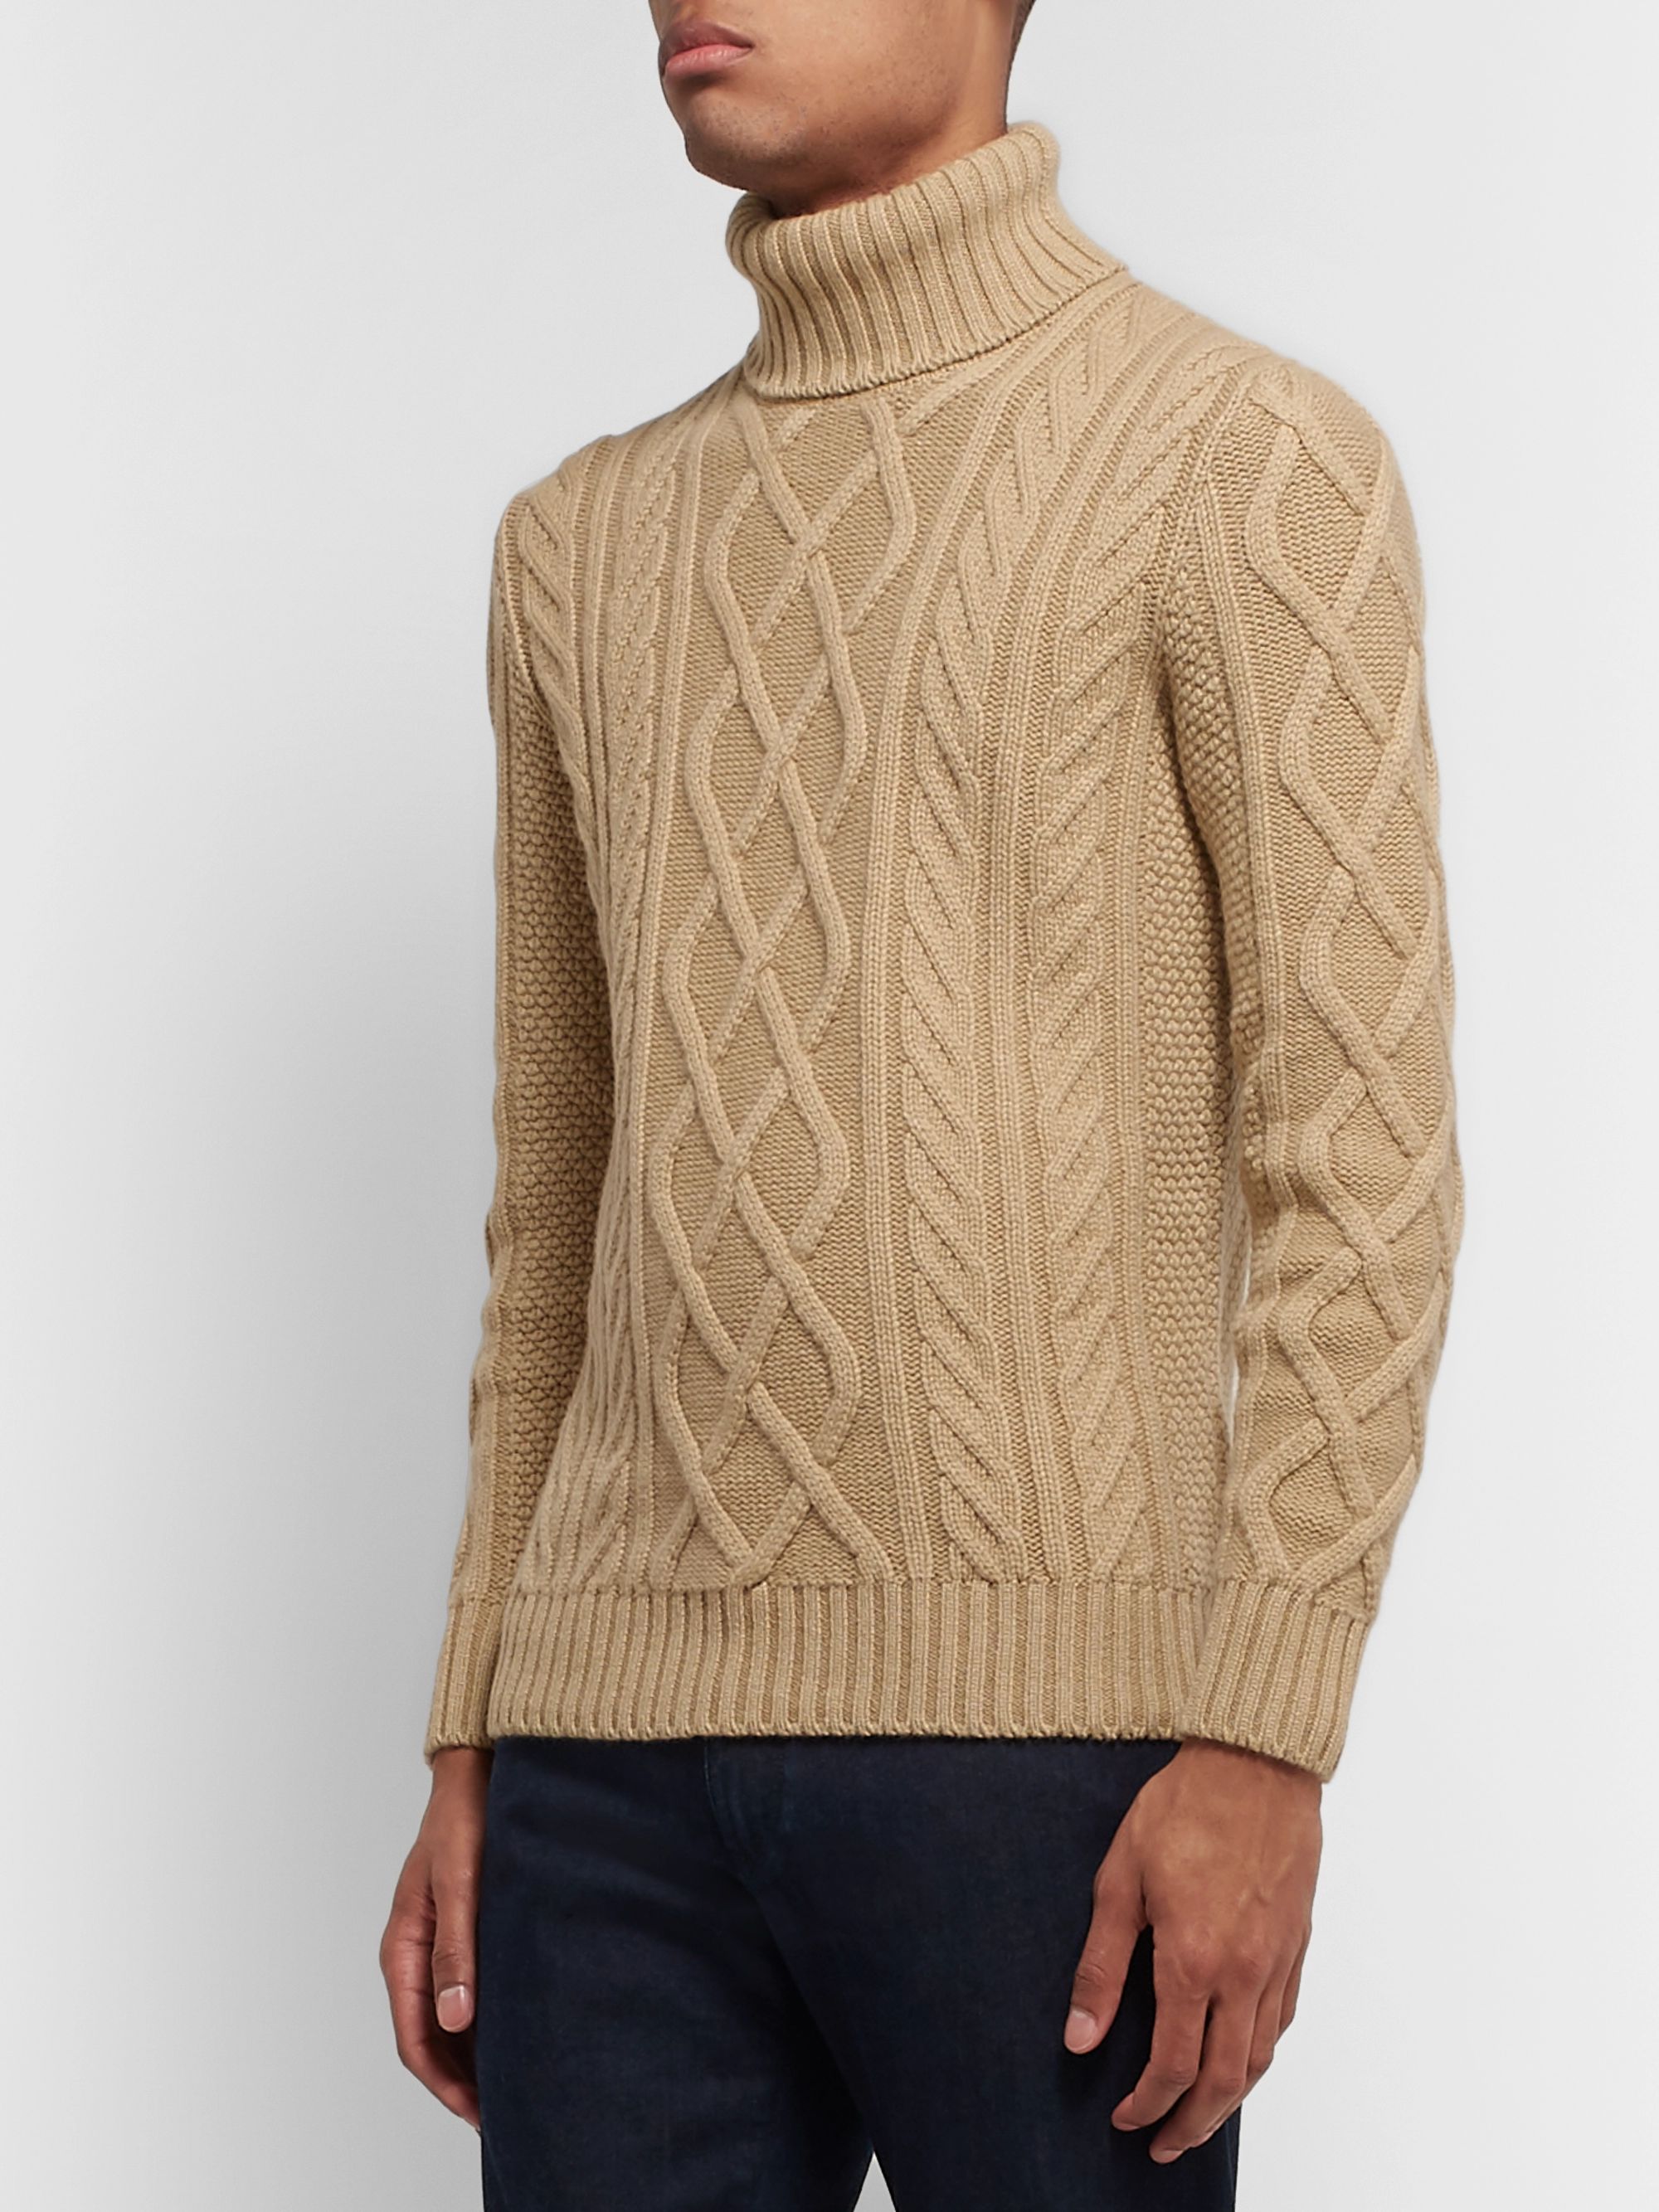 Tan Cable-Knit Baby Cashmere Rollneck Sweater | LORO PIANA | MR PORTER